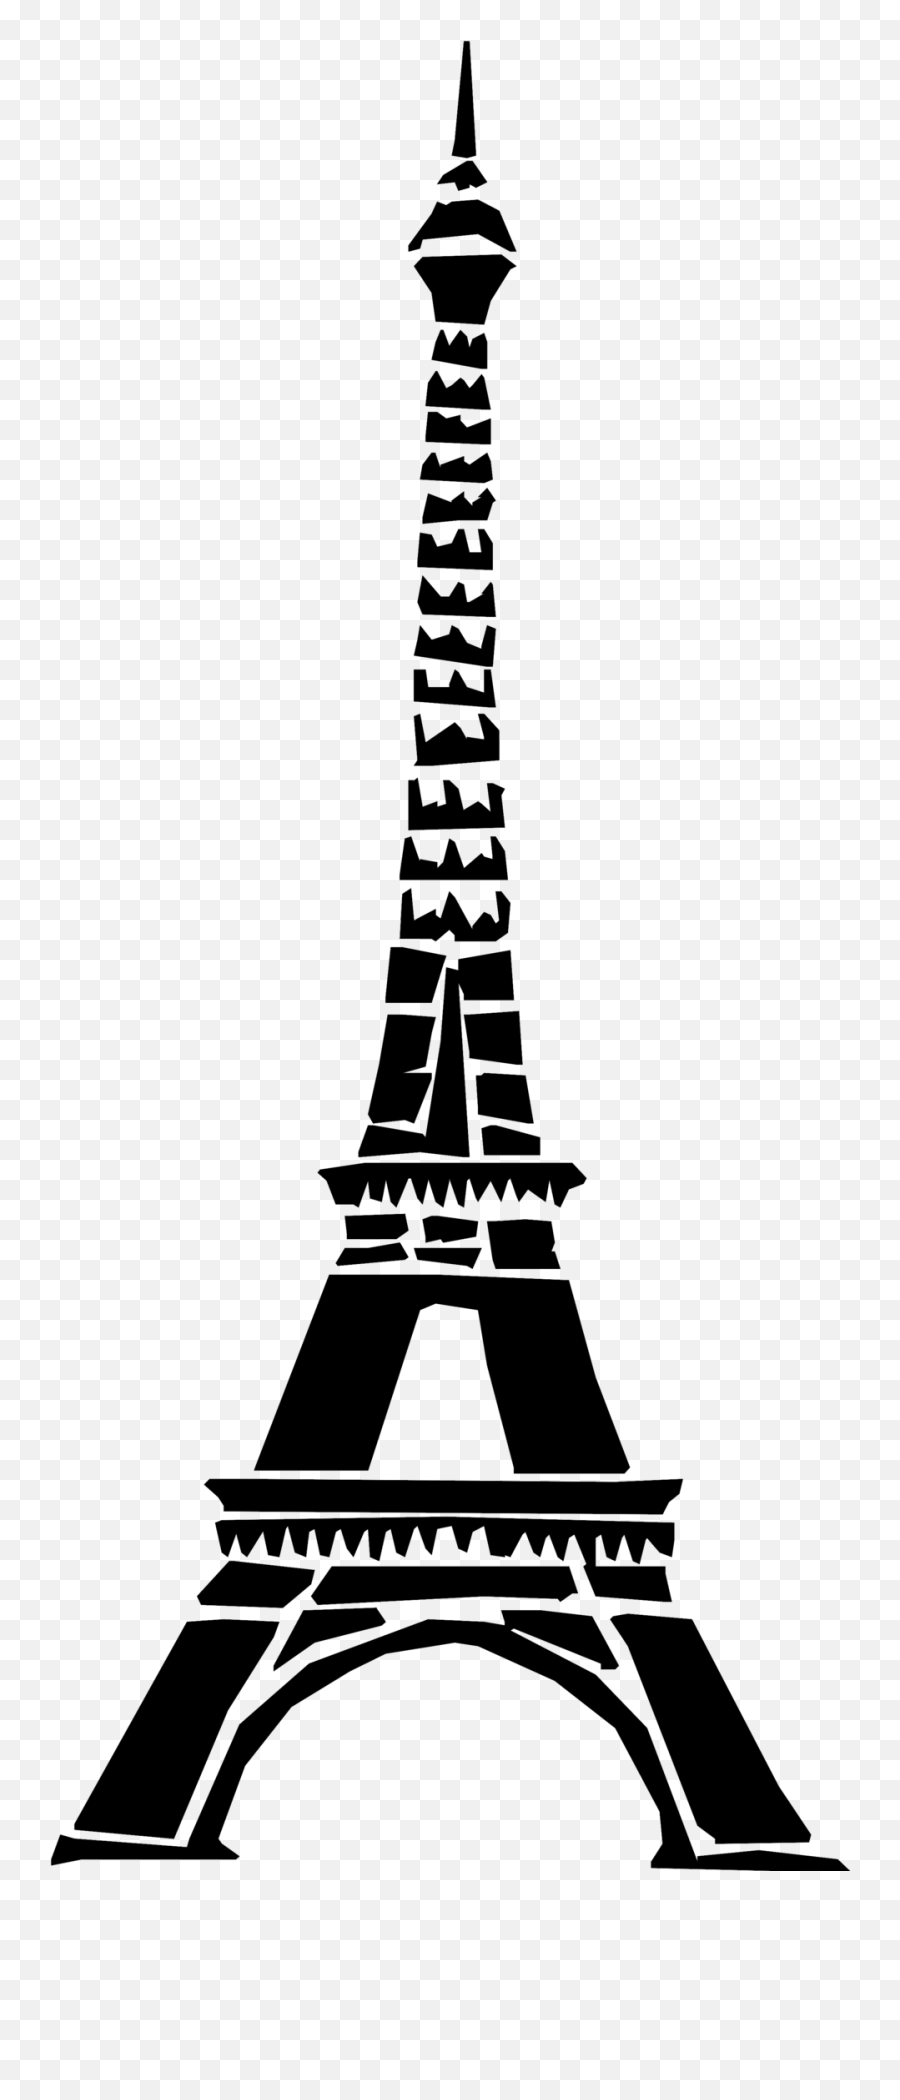 Free Eiffel Tower Clip Art Black And White Download Free - Eiffel Turm Clip Art Emoji,Tower Emoji